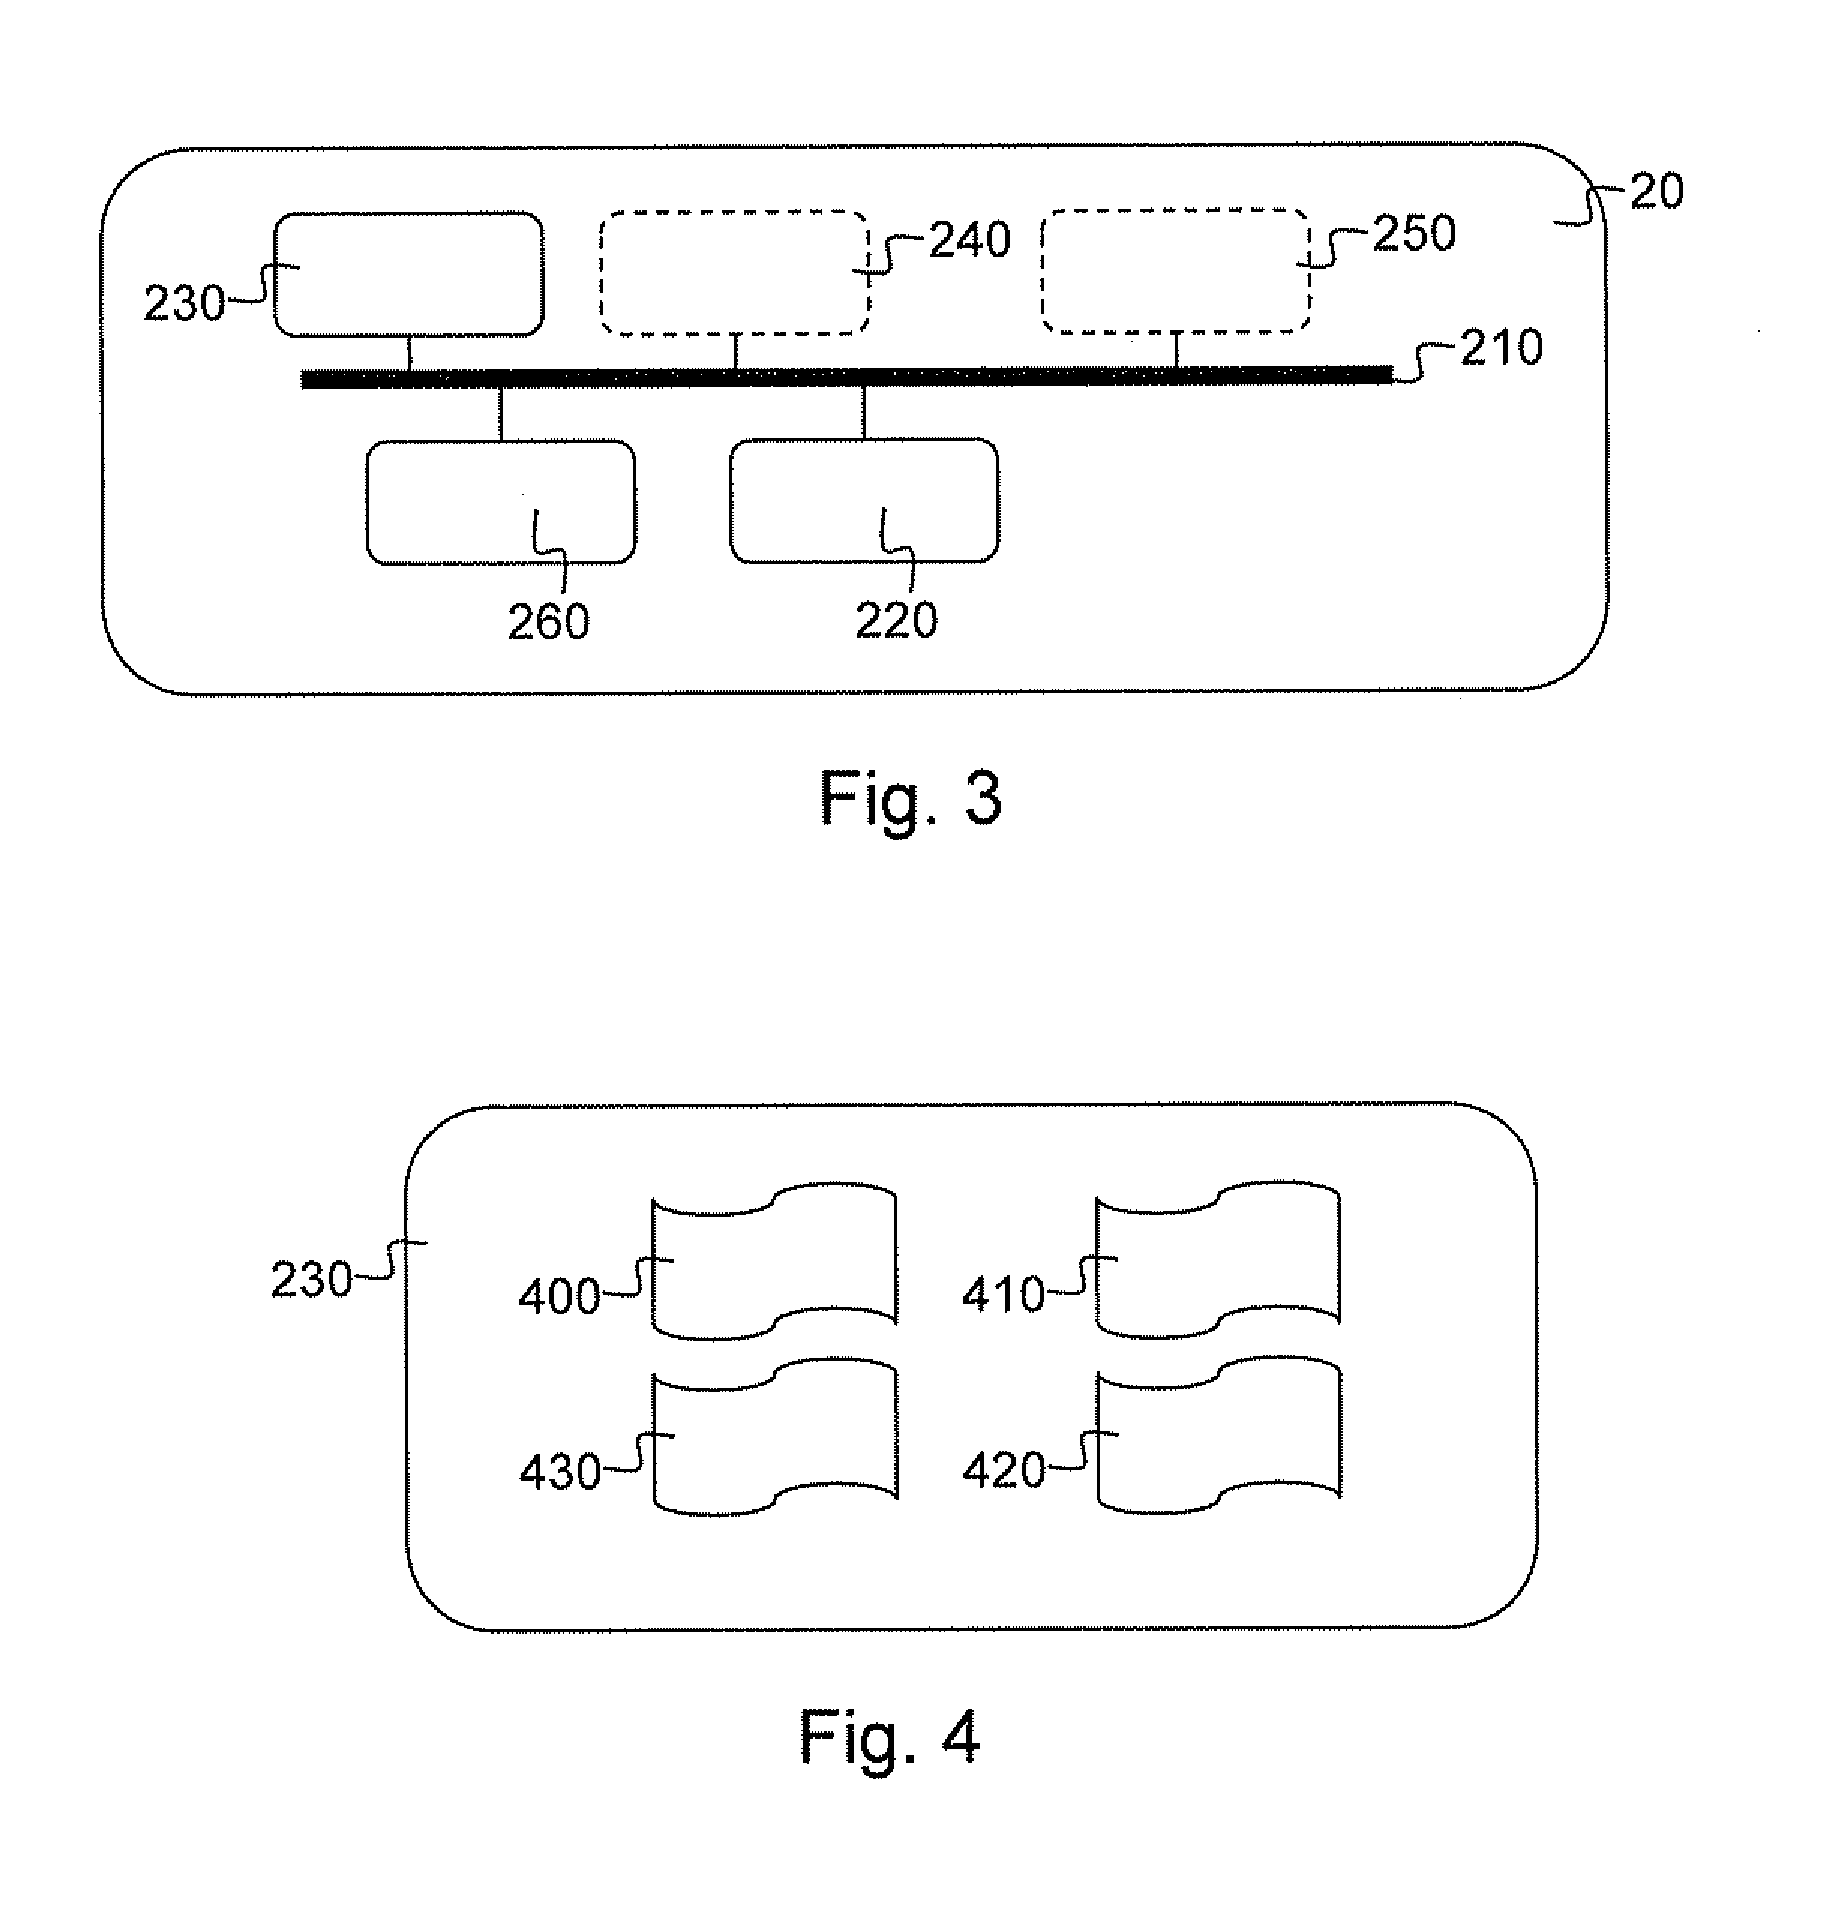 Distributed object storage system